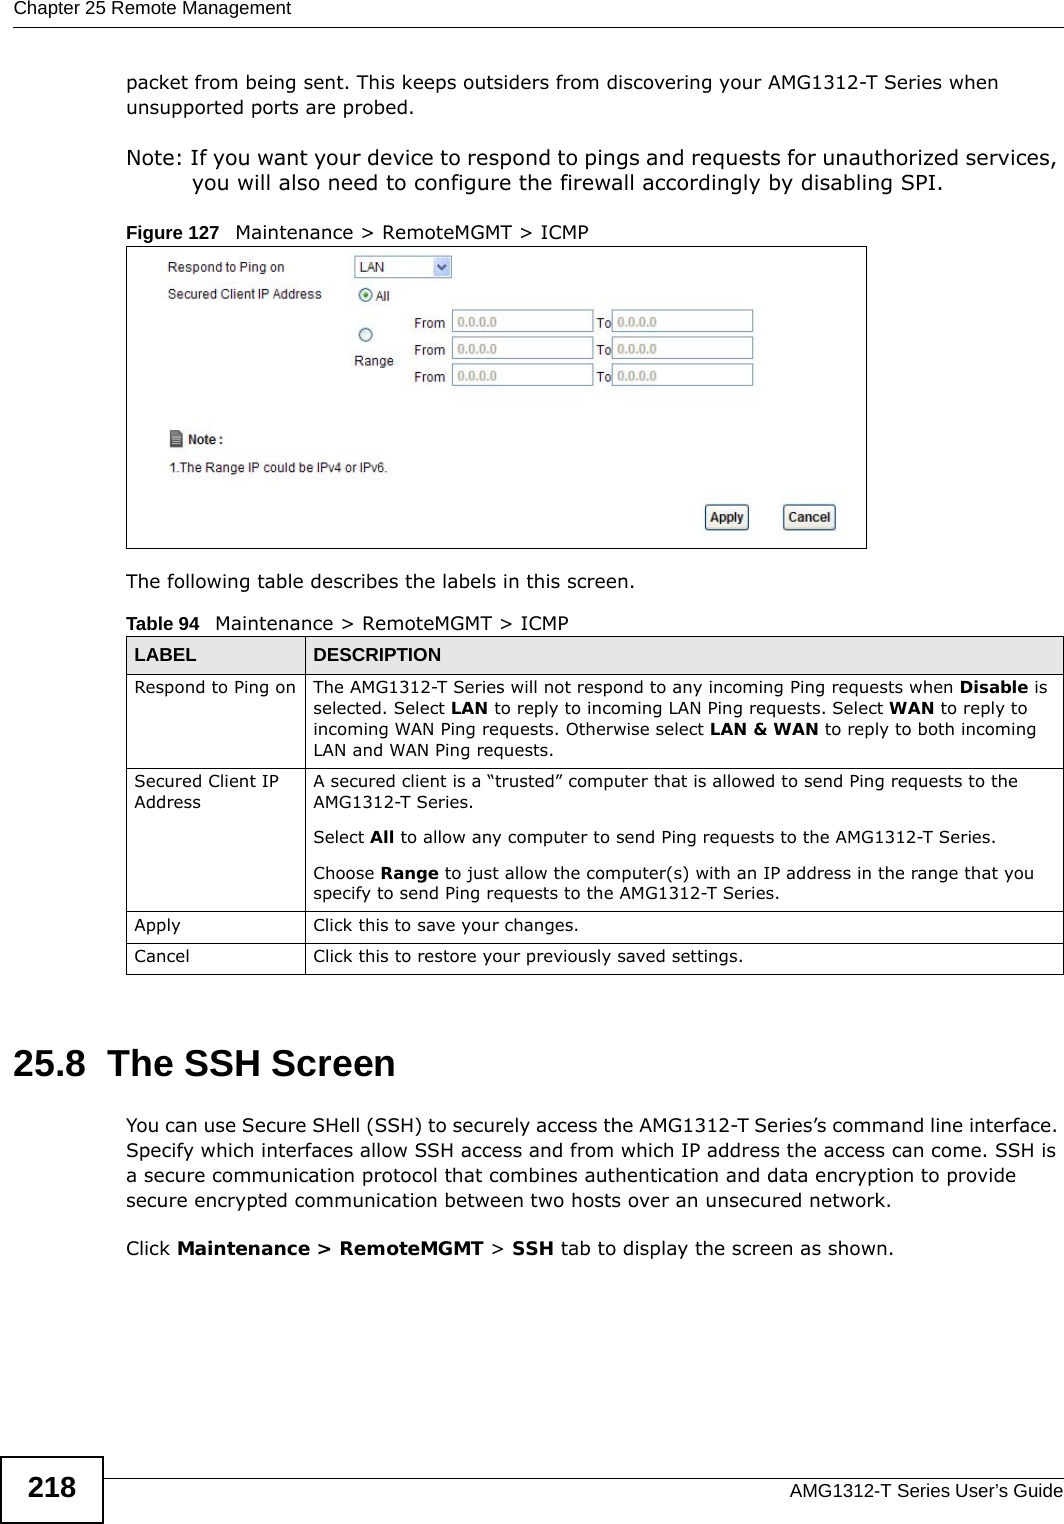 Chapter 25 Remote ManagementAMG1312-T Series User’s Guide218packet from being sent. This keeps outsiders from discovering your AMG1312-T Series when unsupported ports are probed. Note: If you want your device to respond to pings and requests for unauthorized services, you will also need to configure the firewall accordingly by disabling SPI. Figure 127   Maintenance &gt; RemoteMGMT &gt; ICMPThe following table describes the labels in this screen.  25.8  The SSH ScreenYou can use Secure SHell (SSH) to securely access the AMG1312-T Series’s command line interface. Specify which interfaces allow SSH access and from which IP address the access can come. SSH is a secure communication protocol that combines authentication and data encryption to provide secure encrypted communication between two hosts over an unsecured network.Click Maintenance &gt; RemoteMGMT &gt; SSH tab to display the screen as shown. Table 94   Maintenance &gt; RemoteMGMT &gt; ICMPLABEL DESCRIPTIONRespond to Ping on The AMG1312-T Series will not respond to any incoming Ping requests when Disable is selected. Select LAN to reply to incoming LAN Ping requests. Select WAN to reply to incoming WAN Ping requests. Otherwise select LAN &amp; WAN to reply to both incoming LAN and WAN Ping requests. Secured Client IP AddressA secured client is a “trusted” computer that is allowed to send Ping requests to the AMG1312-T Series.Select All to allow any computer to send Ping requests to the AMG1312-T Series.Choose Range to just allow the computer(s) with an IP address in the range that you specify to send Ping requests to the AMG1312-T Series.Apply Click this to save your changes.Cancel Click this to restore your previously saved settings.